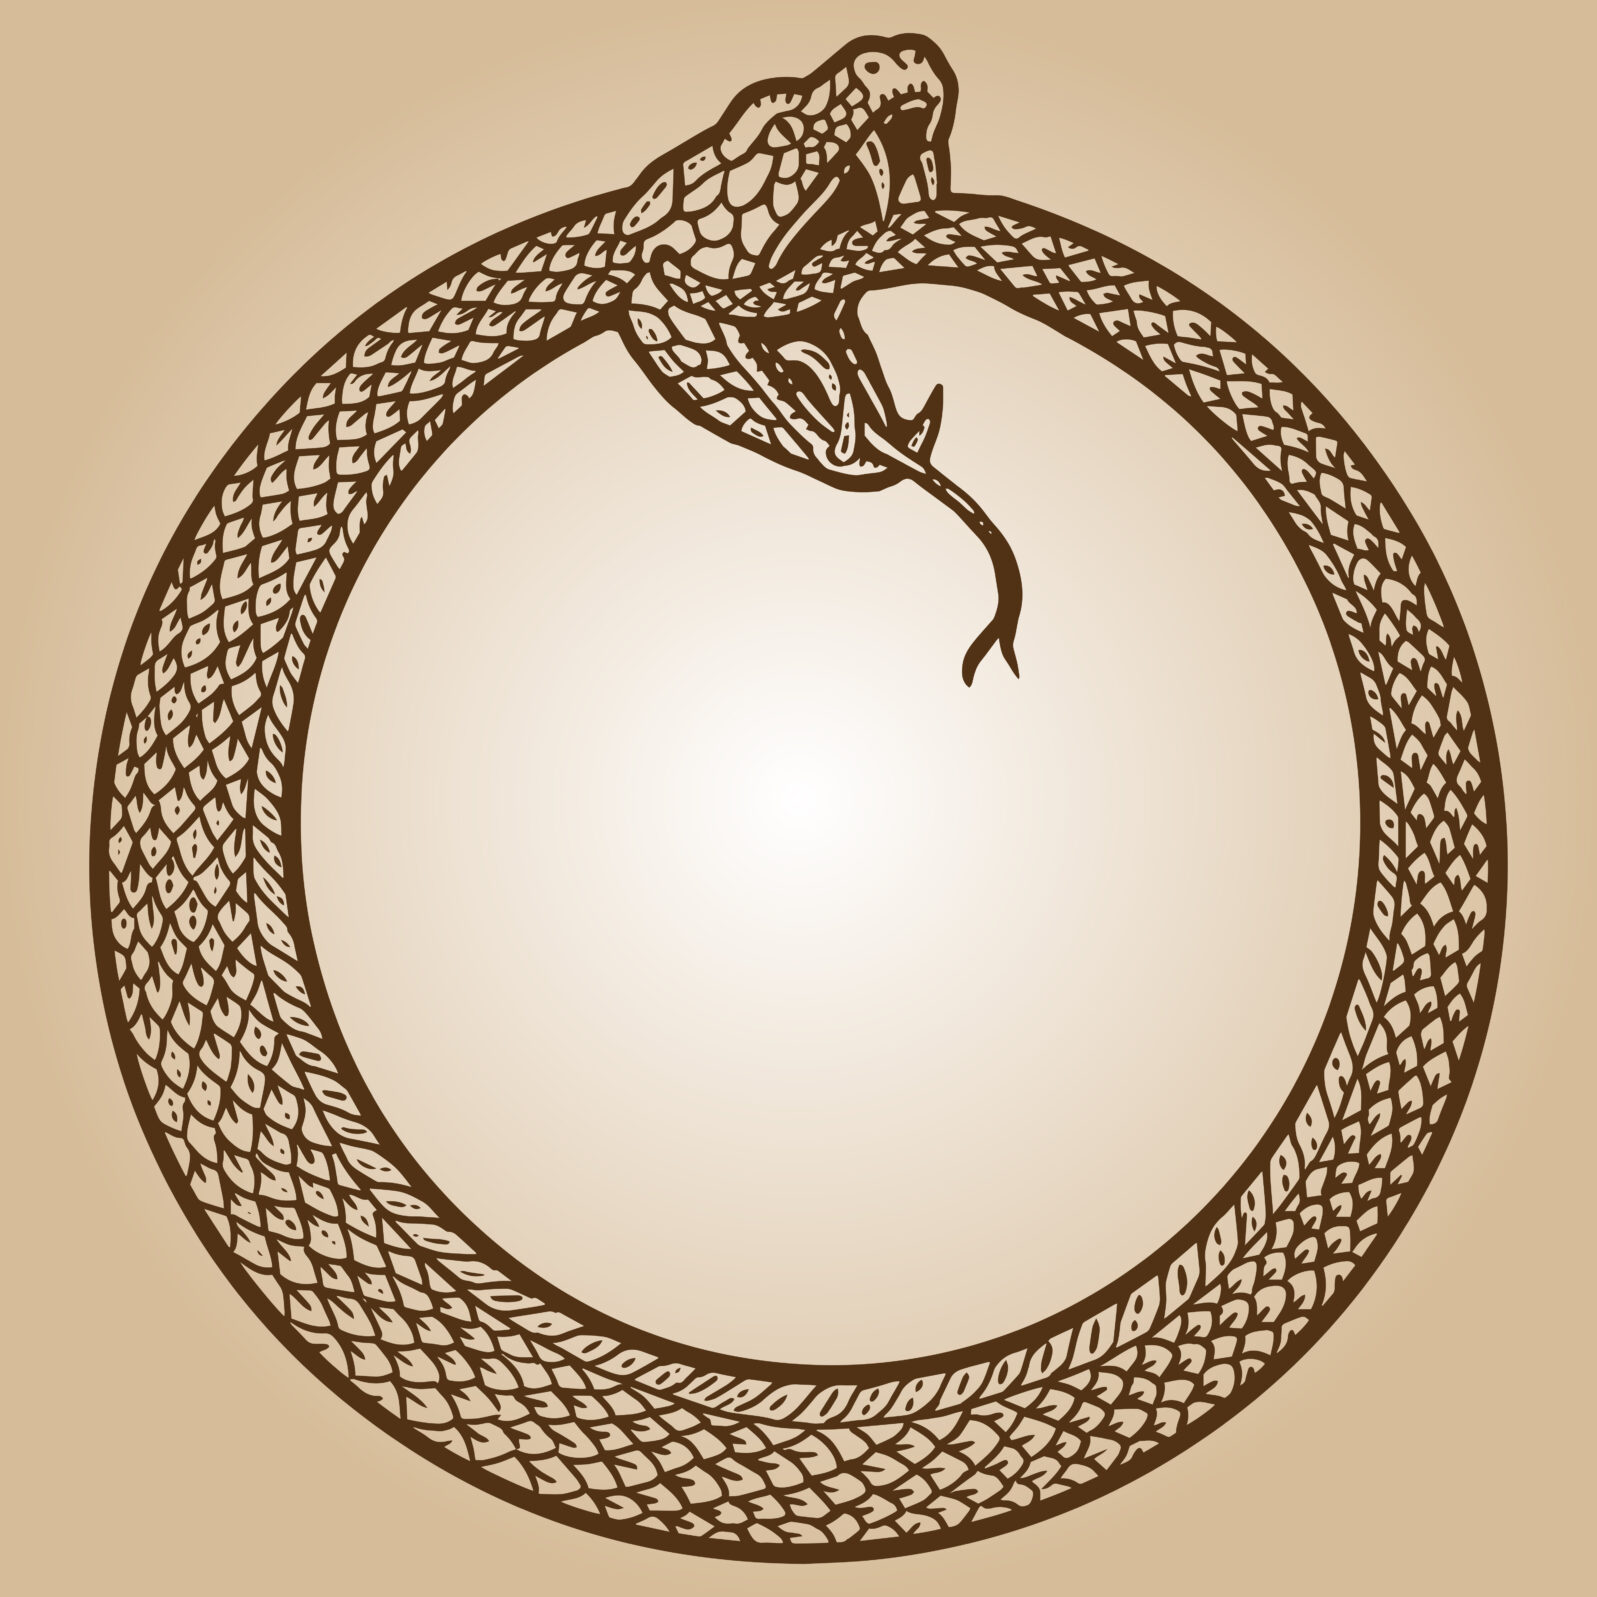 Uroboros, snake coiled in a ring, biting its tail. Engraving sketch scratch board imitation sepia.